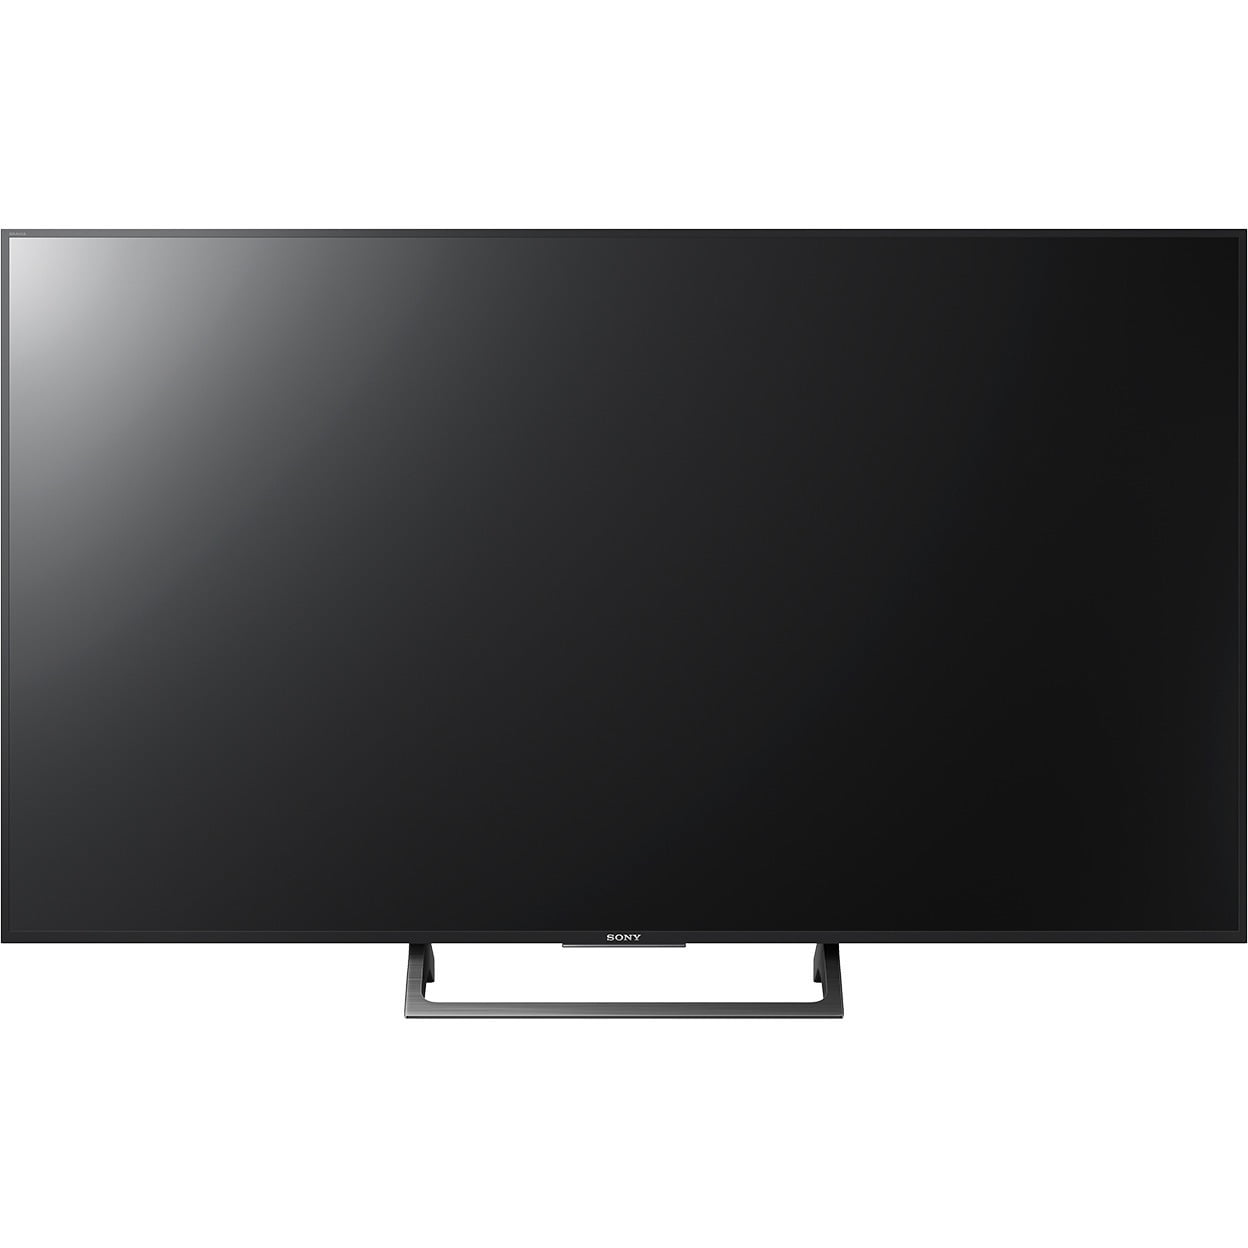 Best Buy: Sony 55 Class LED X720E Series 2160p Smart 4K UHD TV with HDR  KD55X720E